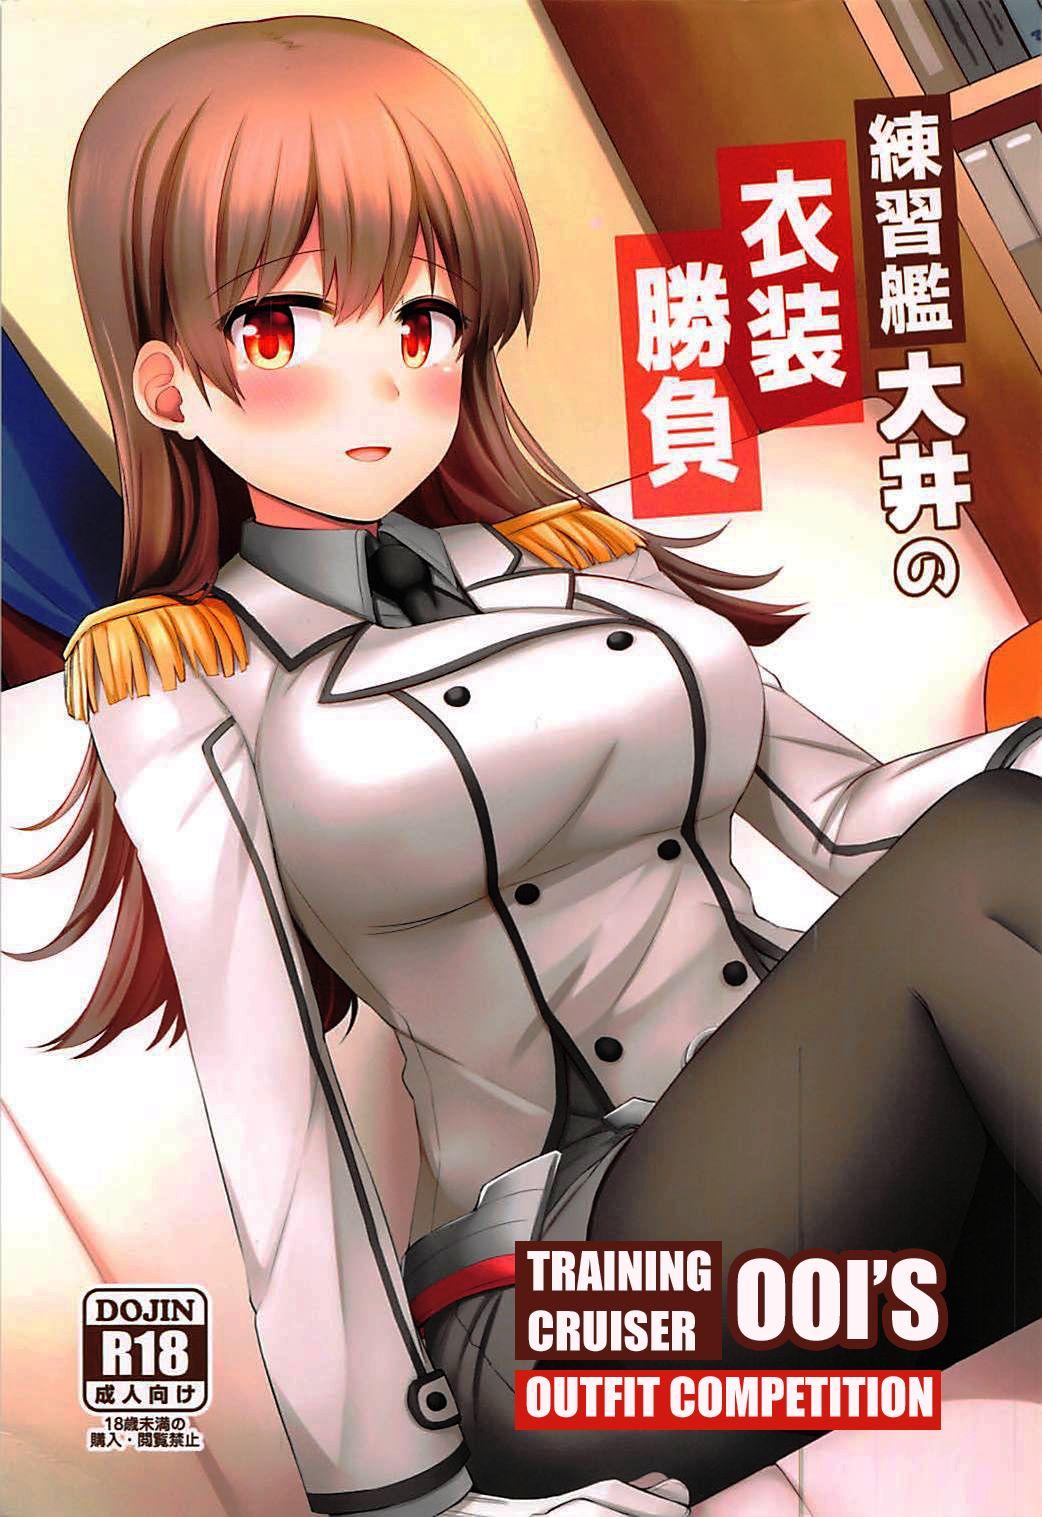 Rough Porn Renshuukan Ooi no Ishou Shoubu | Training Cruiser Ooi's Outfit Competition - Kantai collection Whore - Page 1